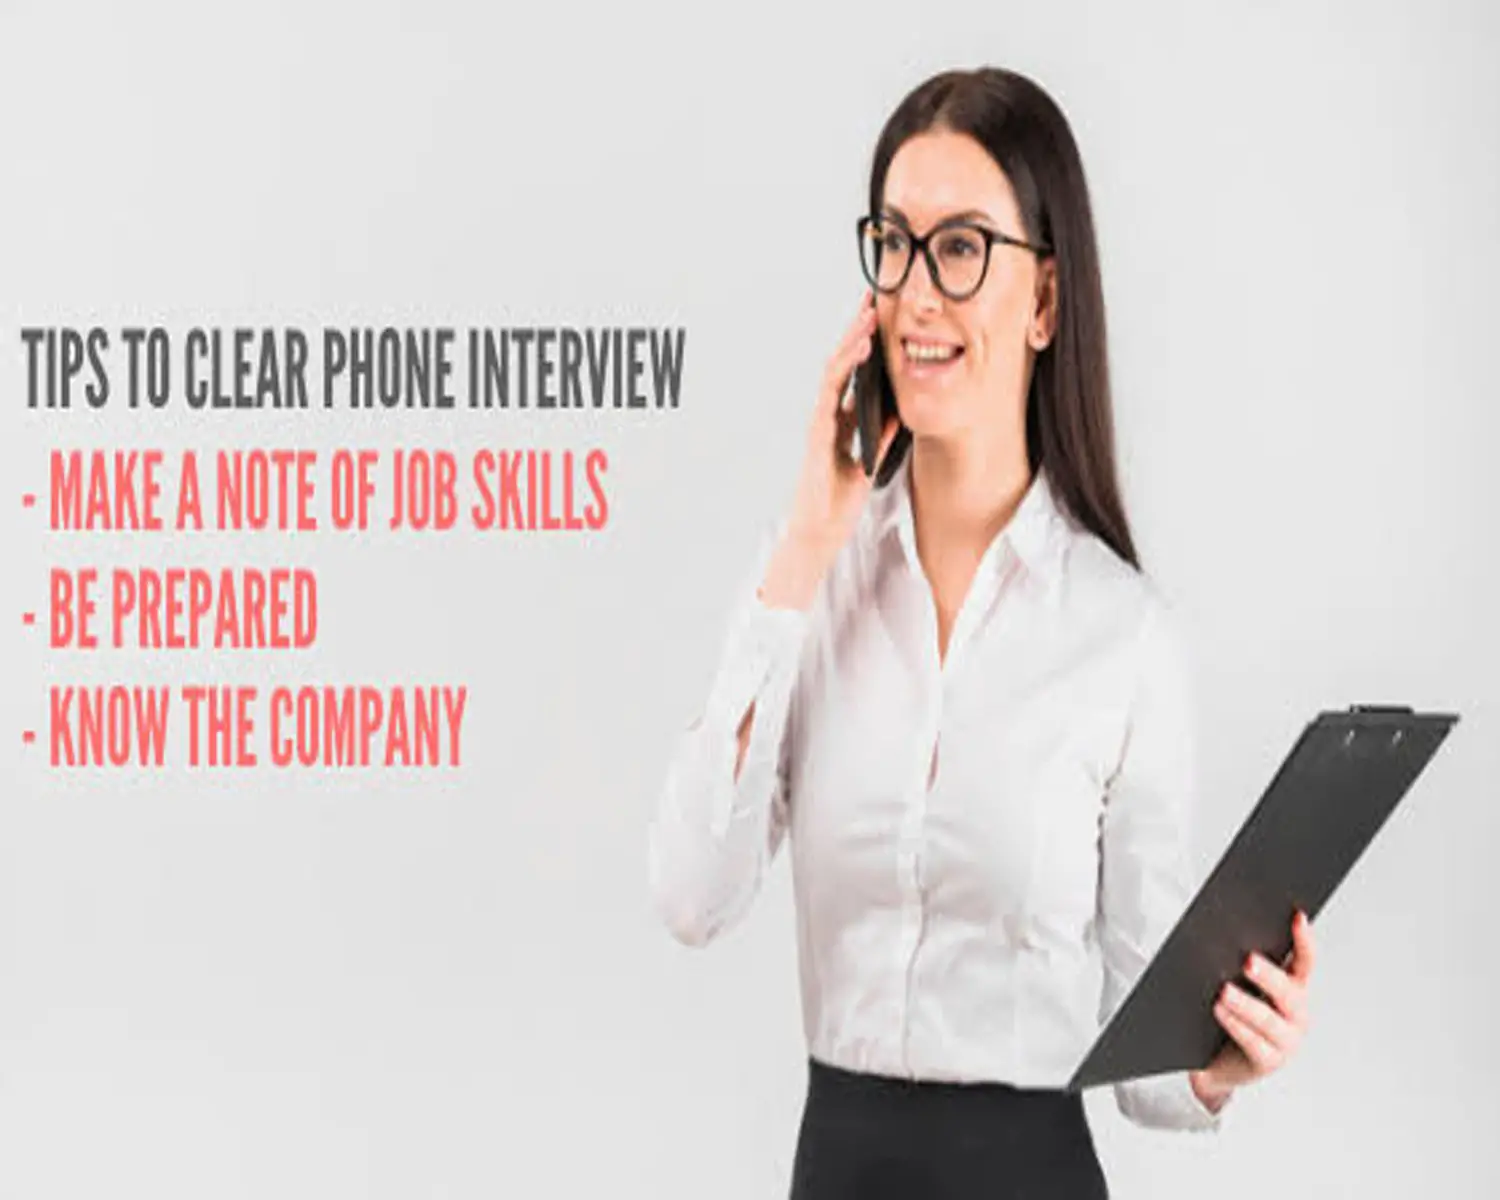 Important tips to clear the Telephone Job Interview in Canada